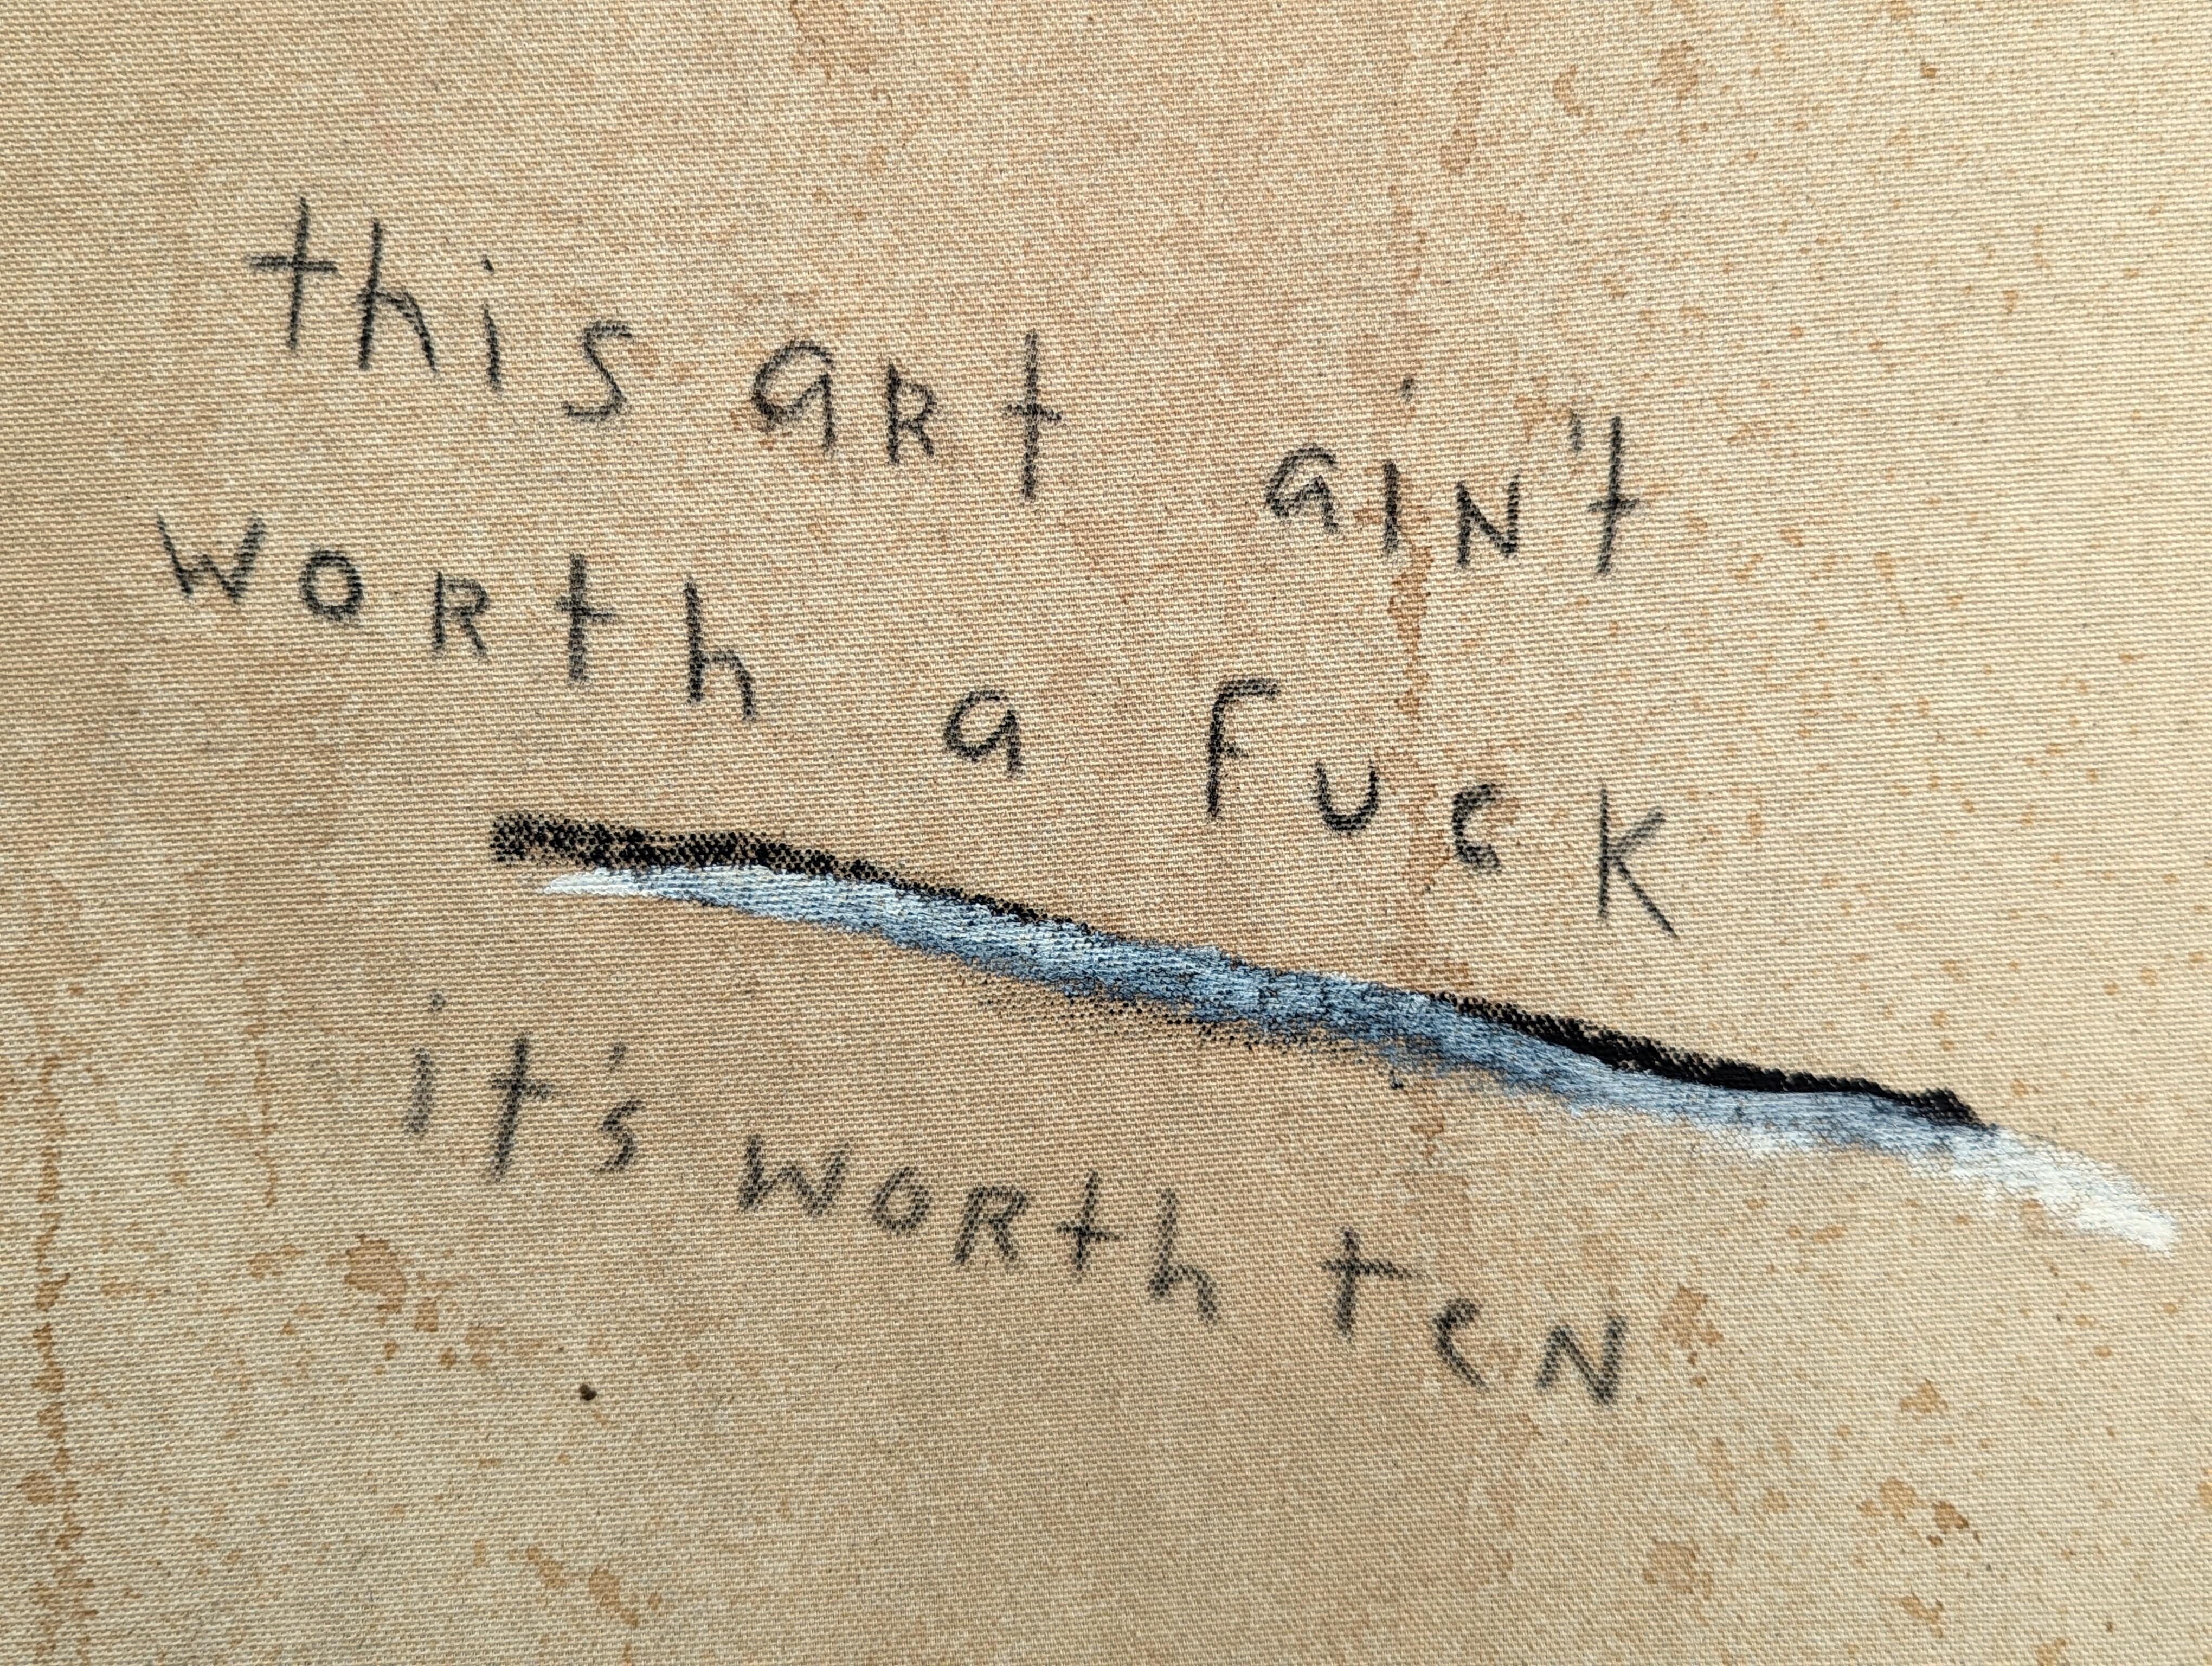 “It's Worth Ten” Abstract Contemporary Black & Tan Text Painting For Sale 2